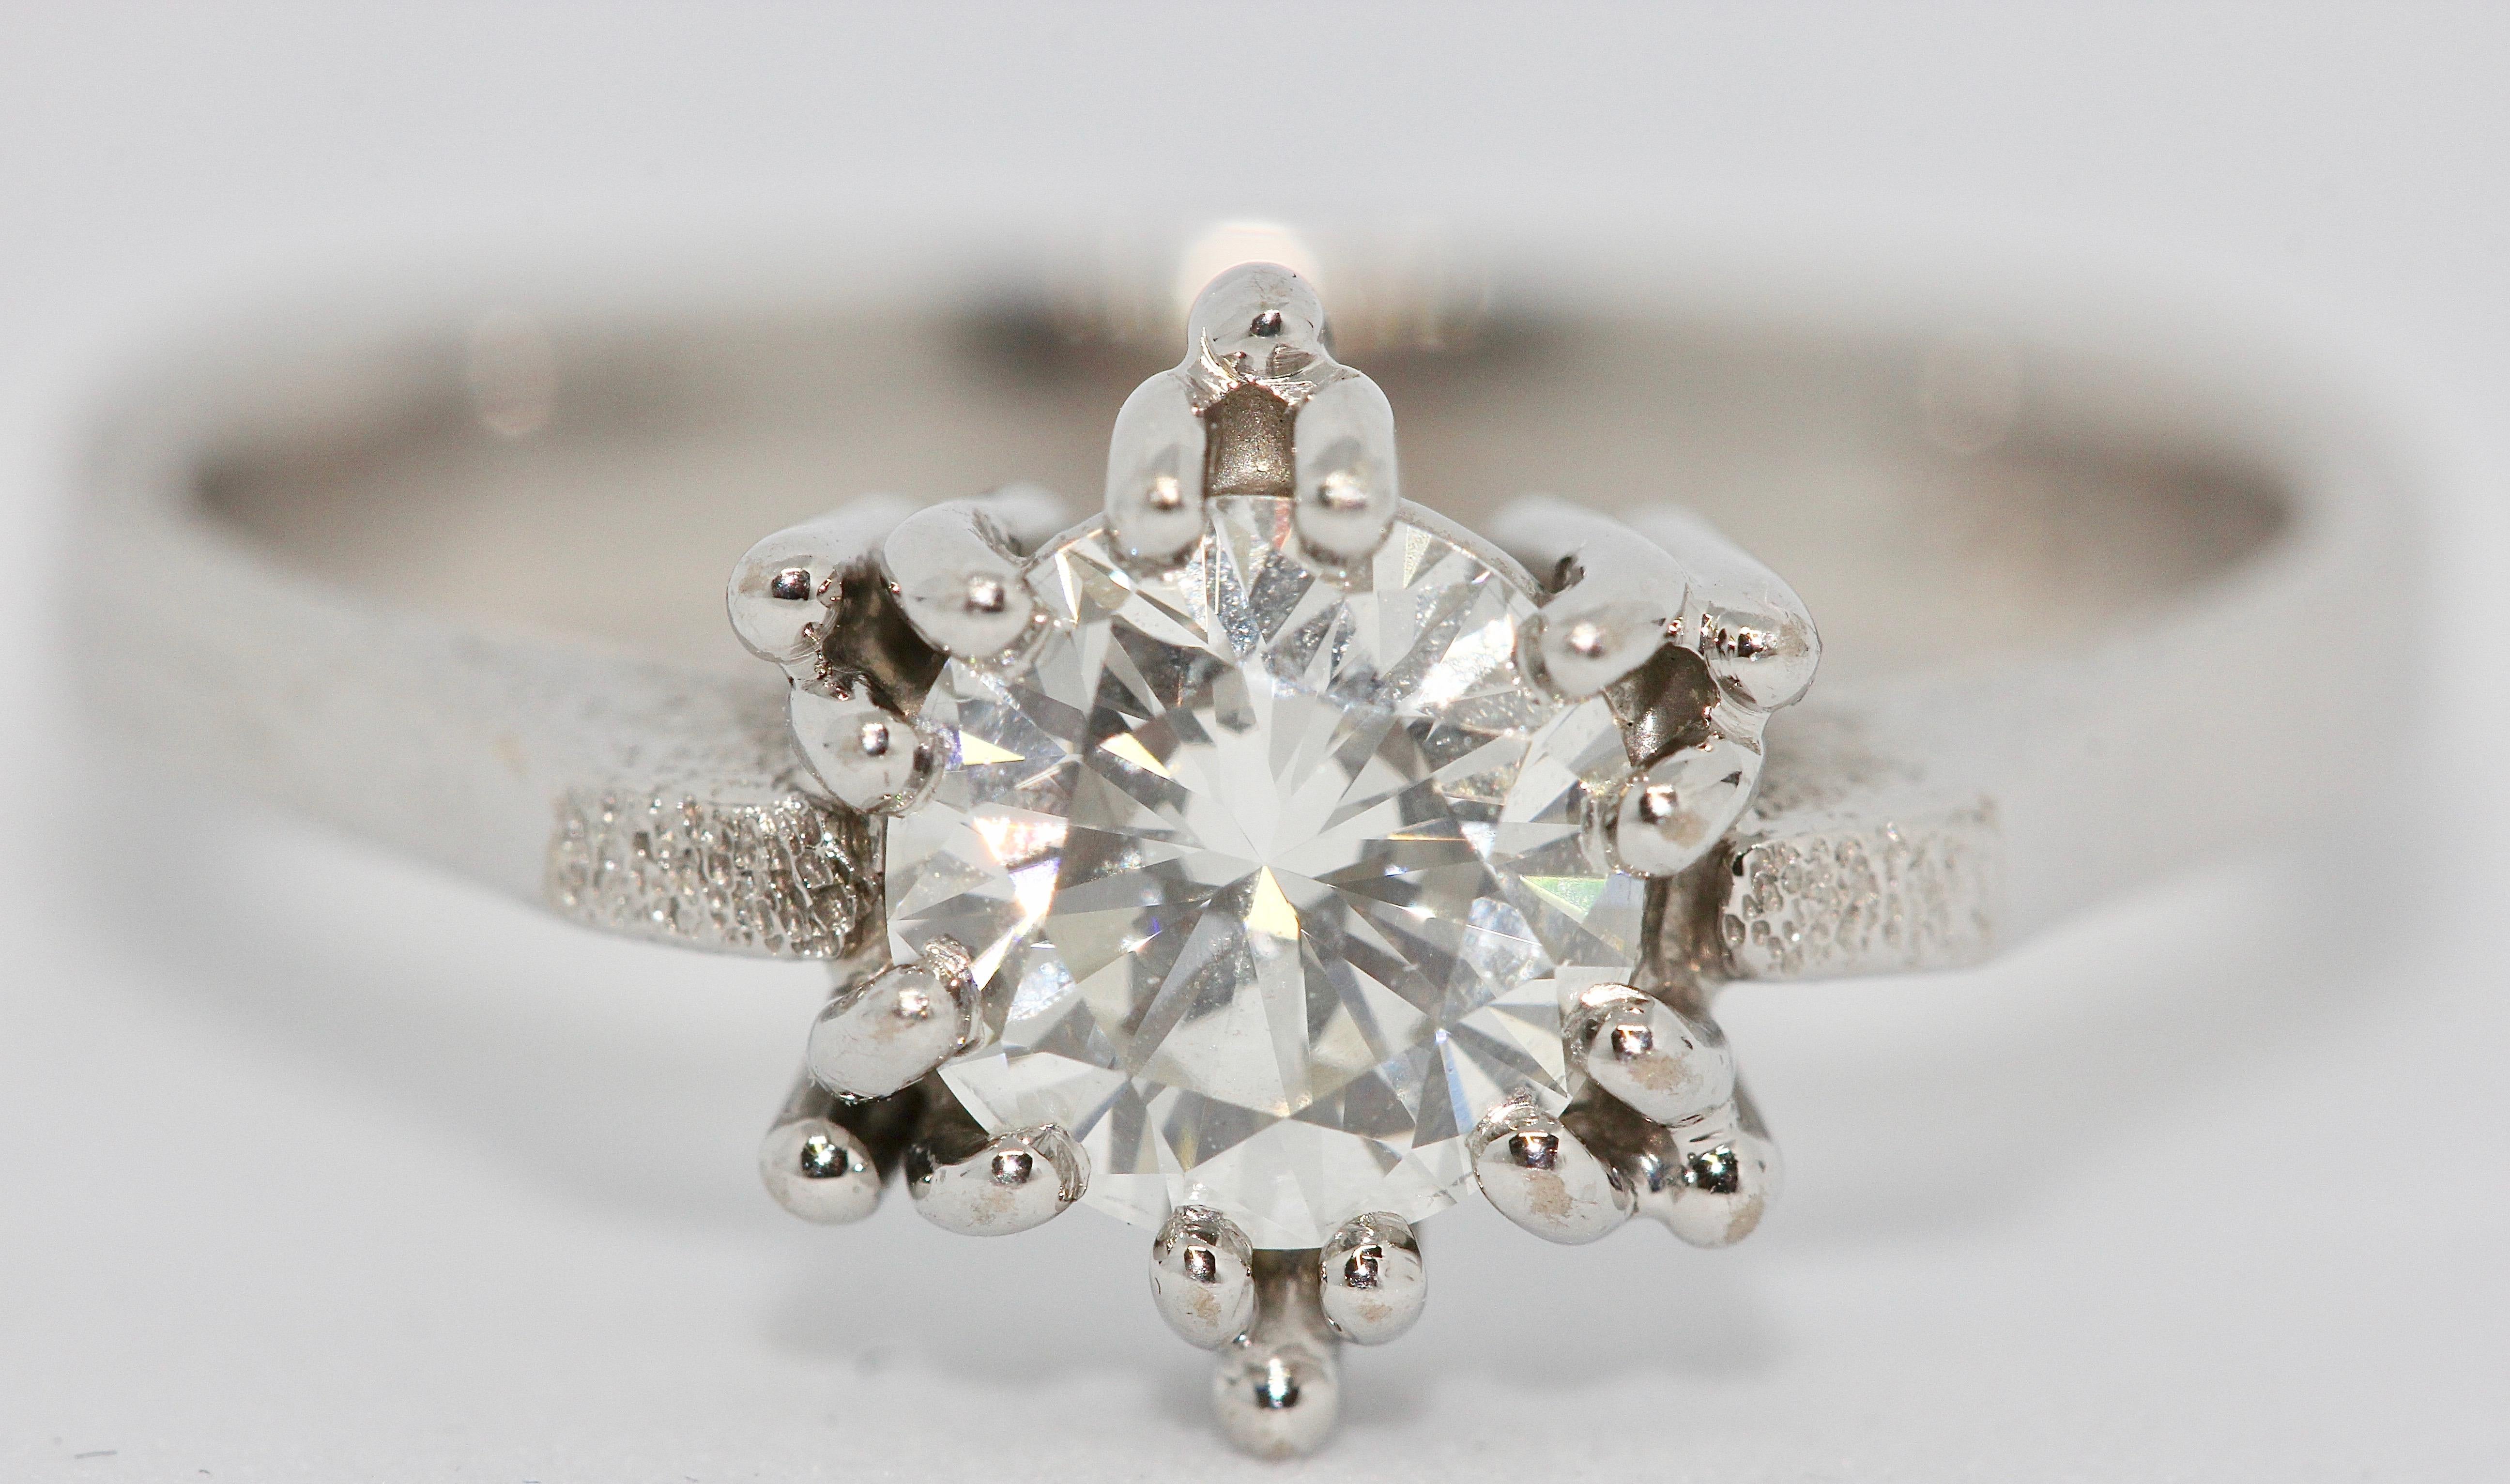 An almost perfect Diamond Solitaire, 18 Karat white Gold Ring.

1.01 Carat 
Flawless
Top Wesselton 
Cut: Very Good